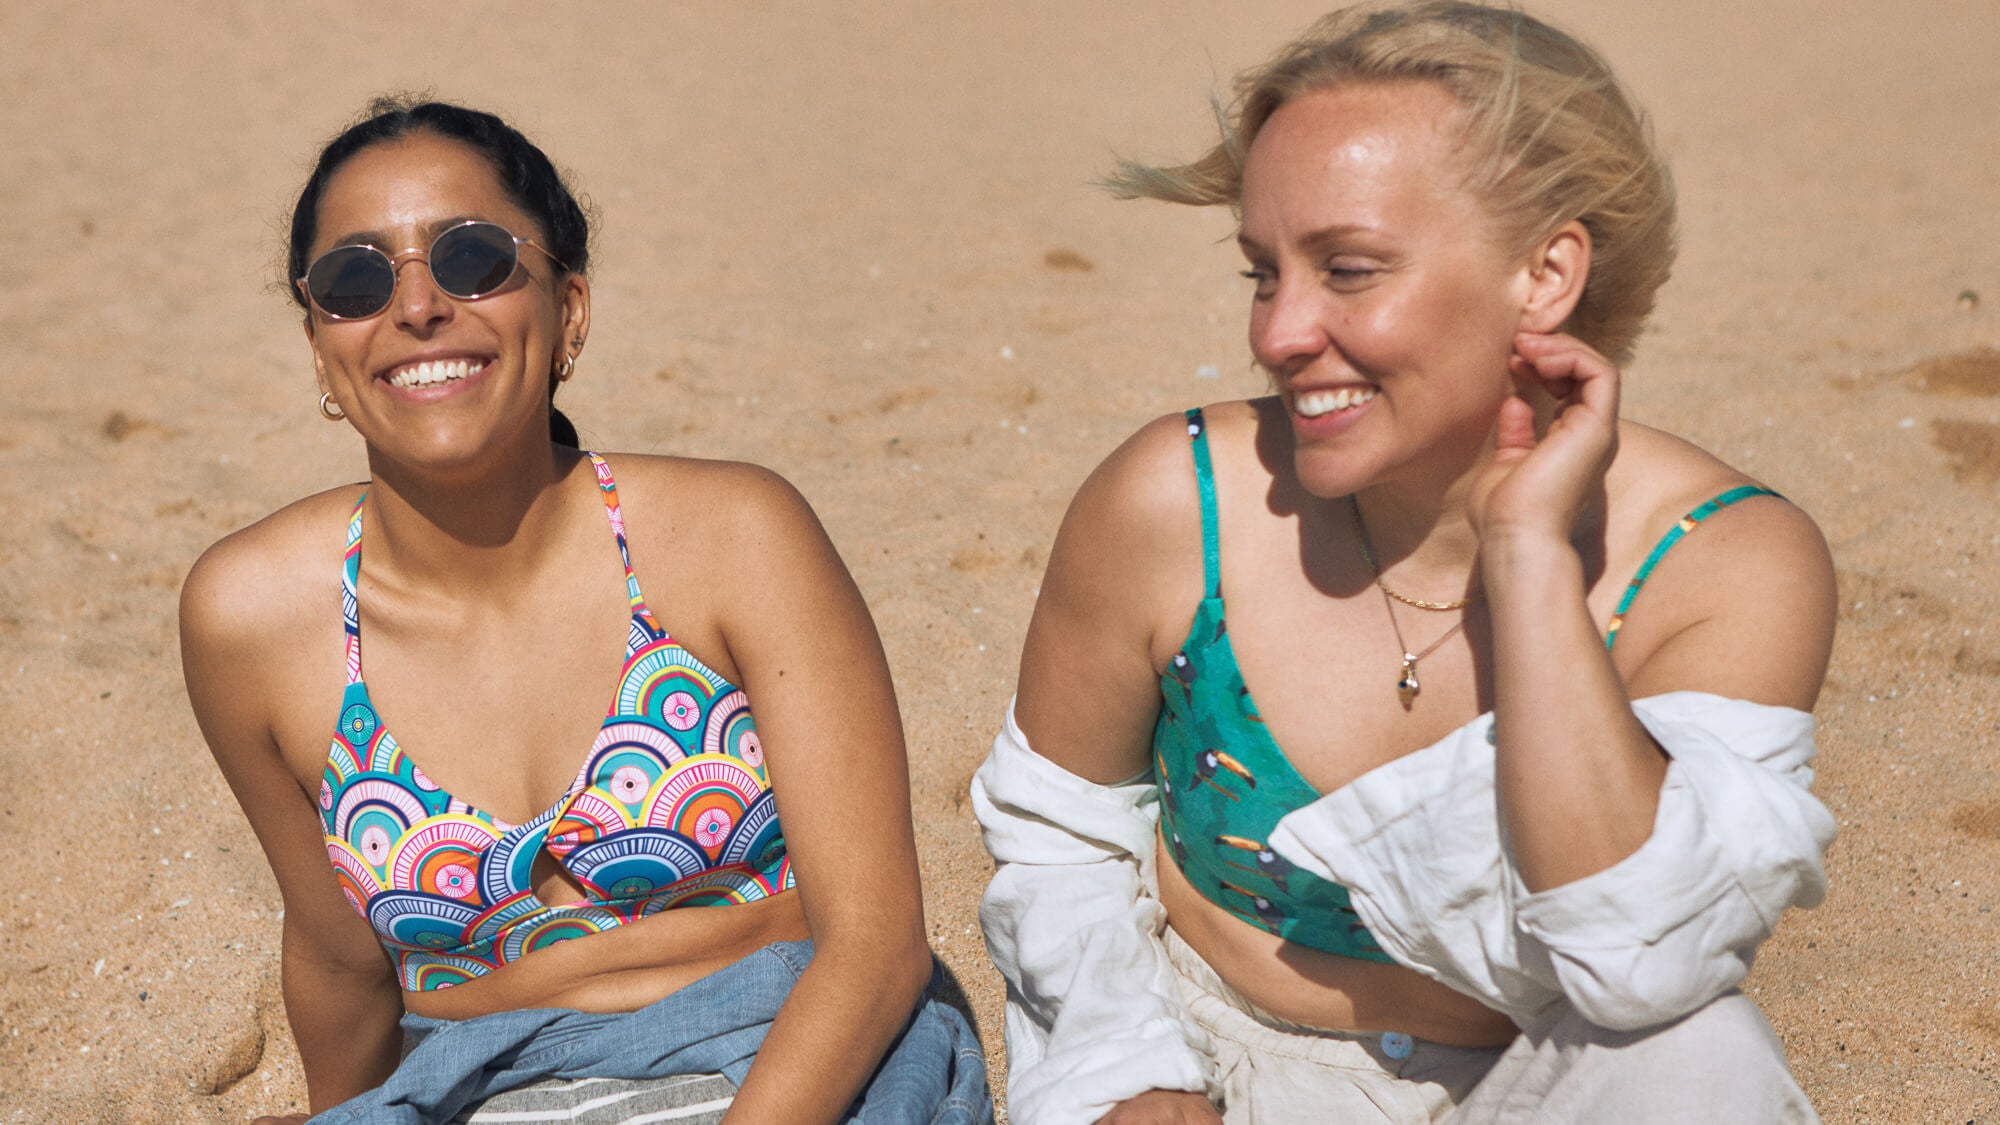 two women sitting next to each other on the beach and laughing. One is wearing a multicolor sports bra with a colorful, geometric design. The other is wearing a green sports bra with a hand-painted Toucan print and white and cream linen shirt and pants.